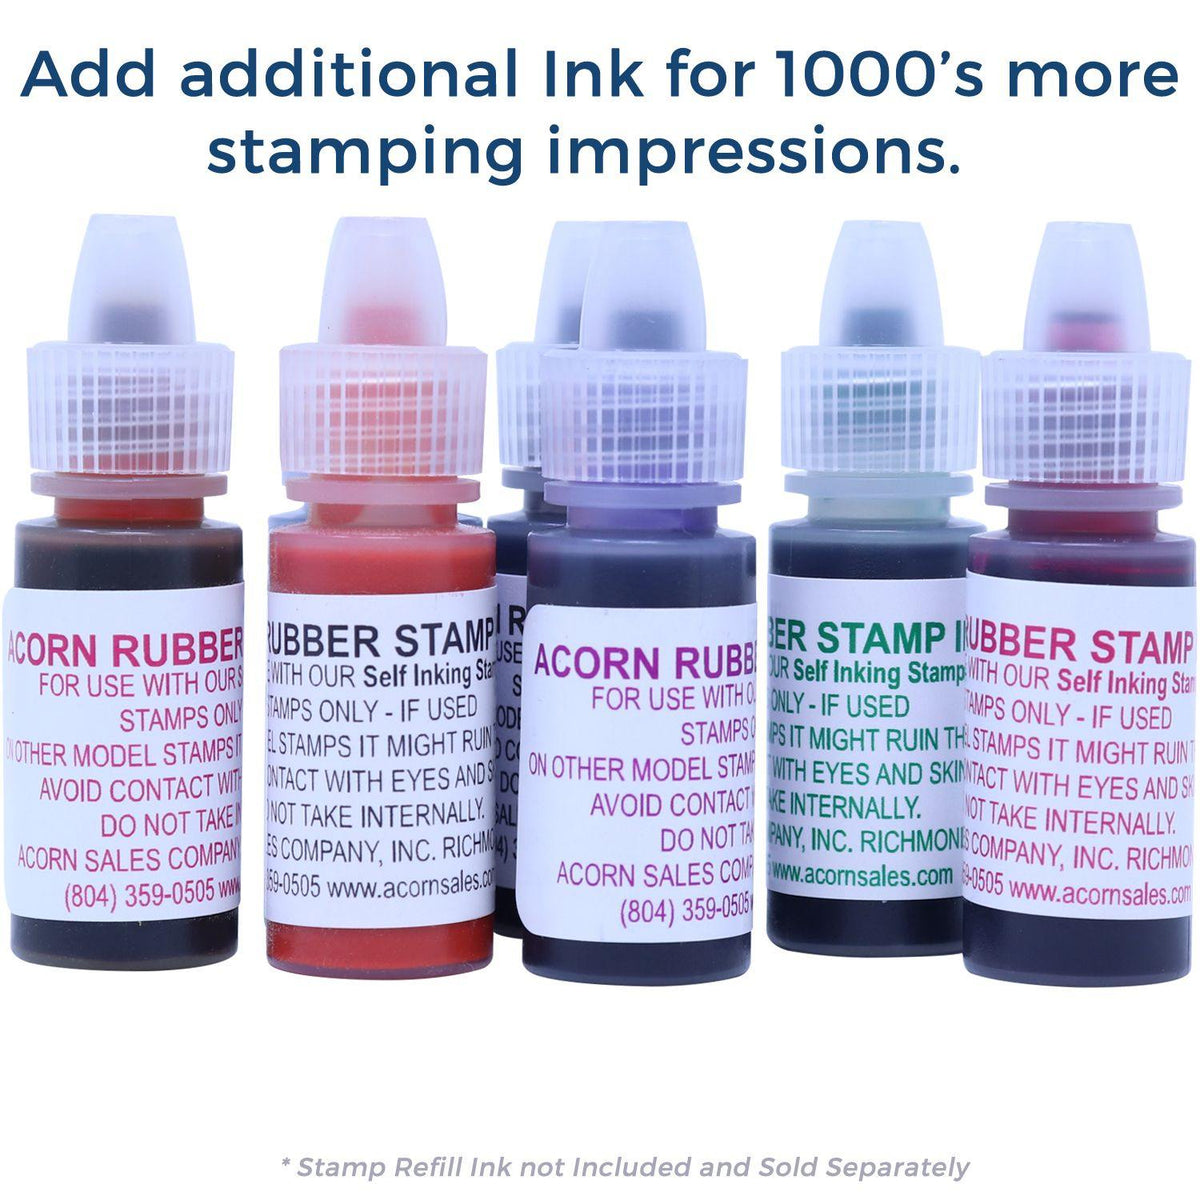 Refill Inks for Large Pre Inked Smoker Stamp Available